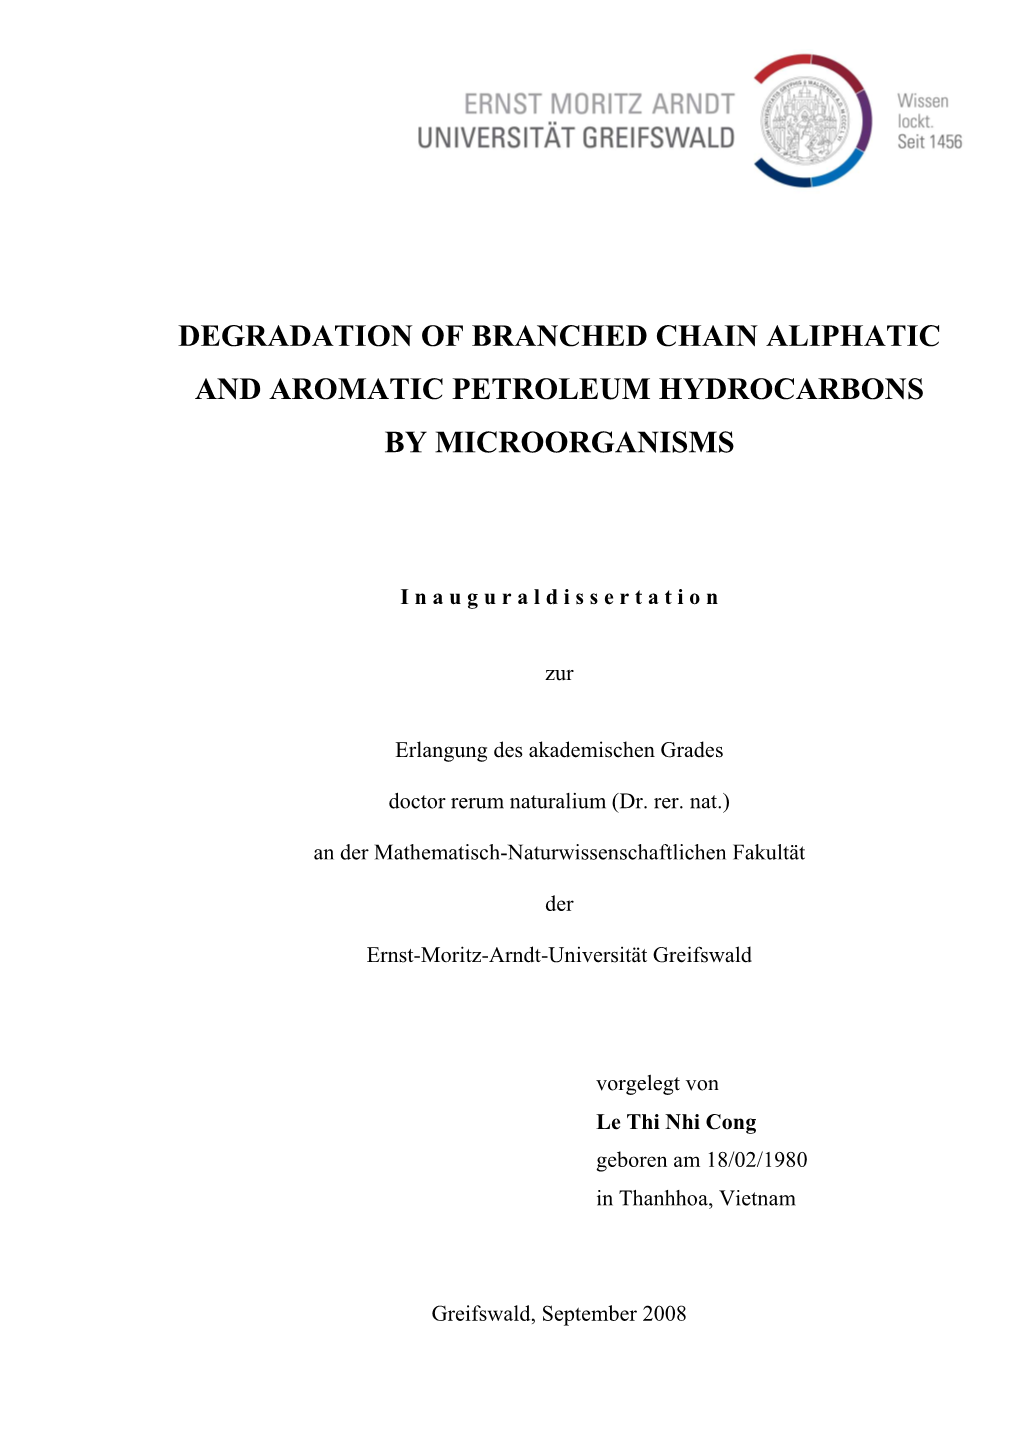 Degradation of Branched Chain Aliphatic and Aromatic Petroleum Hydrocarbons by Microorganisms